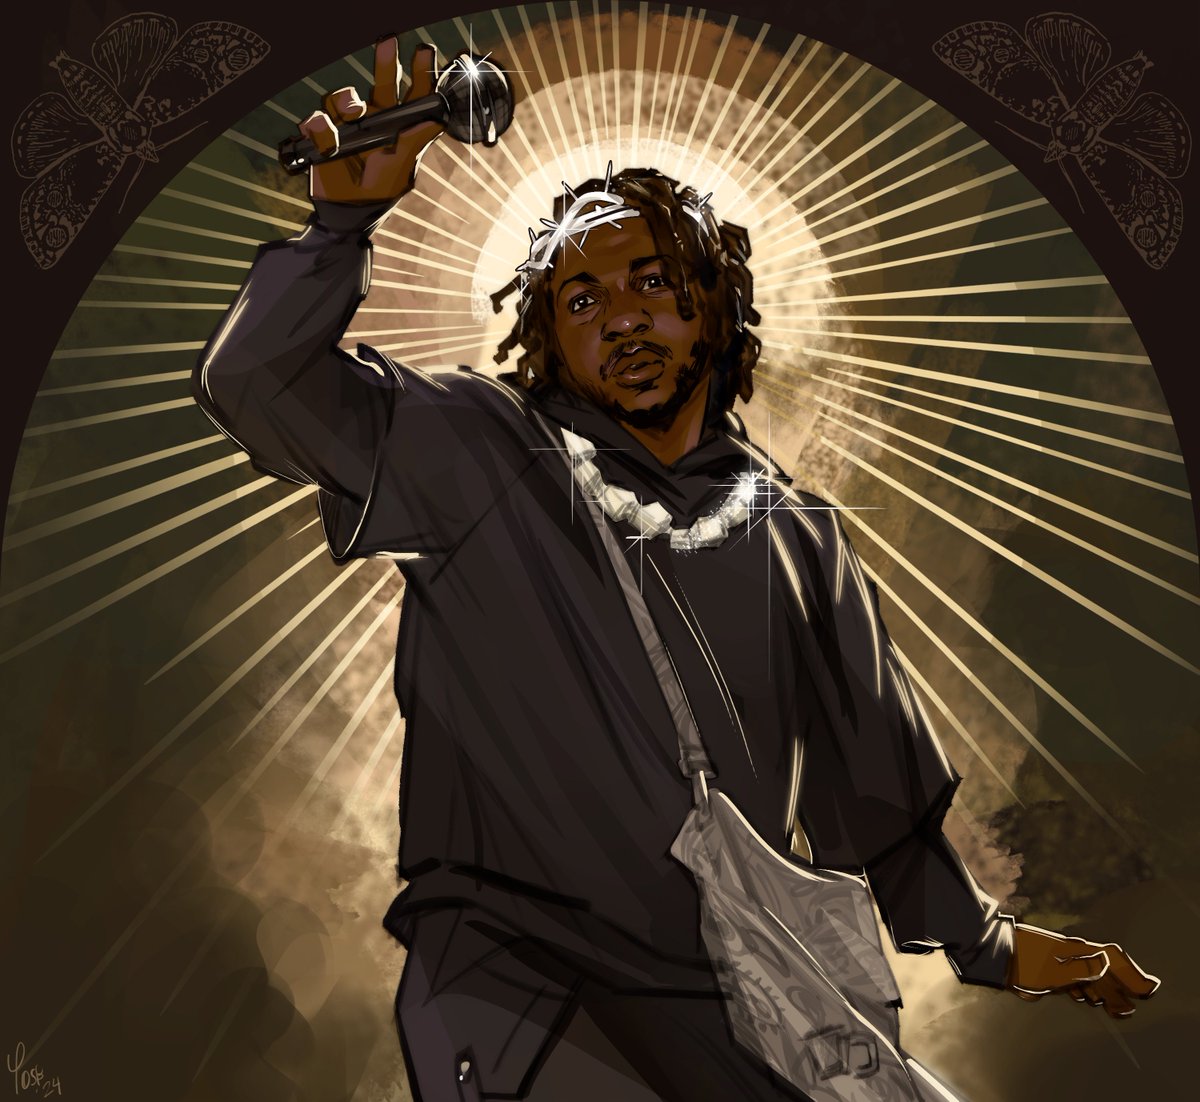 bard kendrick of lamar who hath slain many drakes... yuh 'fuck a rap battle, this a life long battle with yourself' was some RELIGIOUS shit 🎤🦋